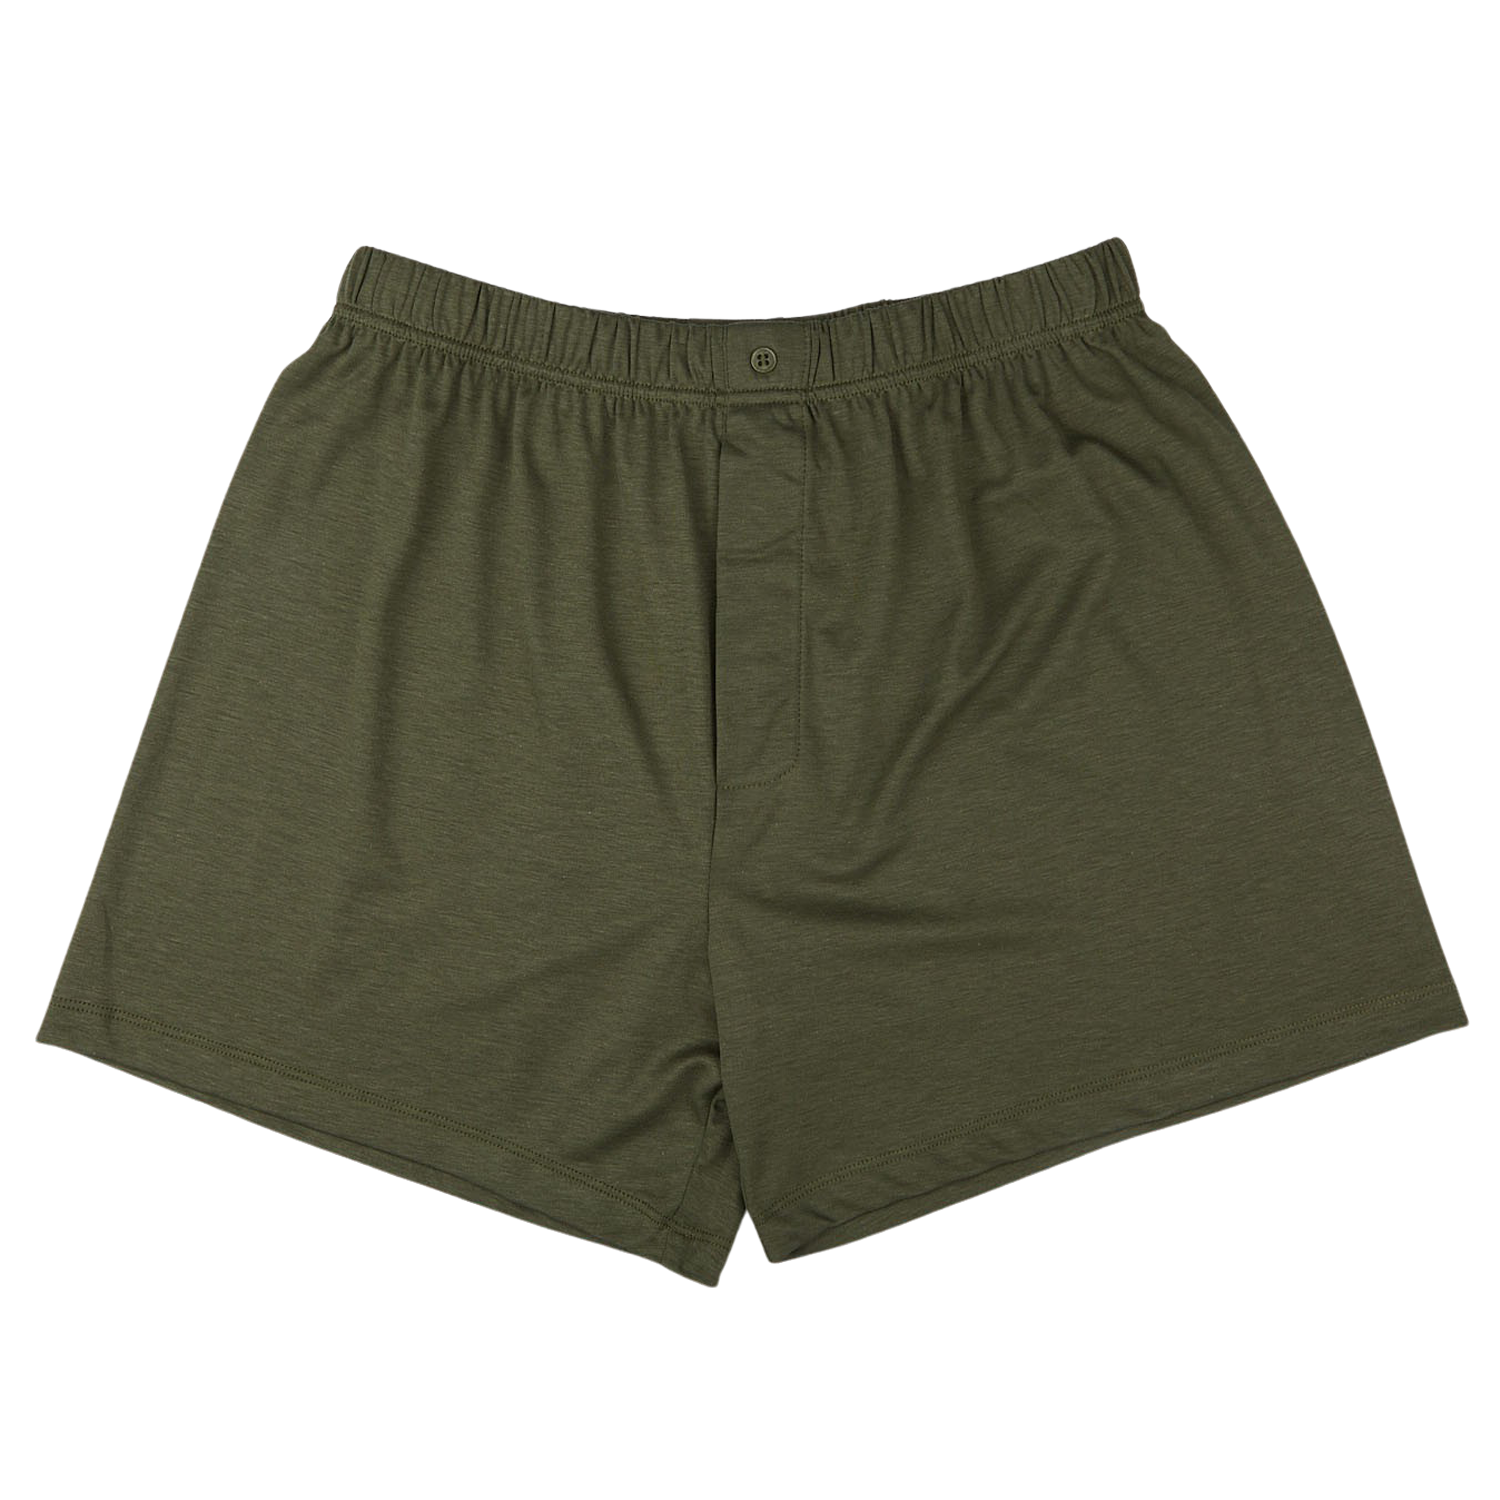 Olive Lyocell Cotton Henner Boxers from The White Briefs with an elastic waistband and a button fly, laid flat against a white background, reminiscent of classic boxer comfort.